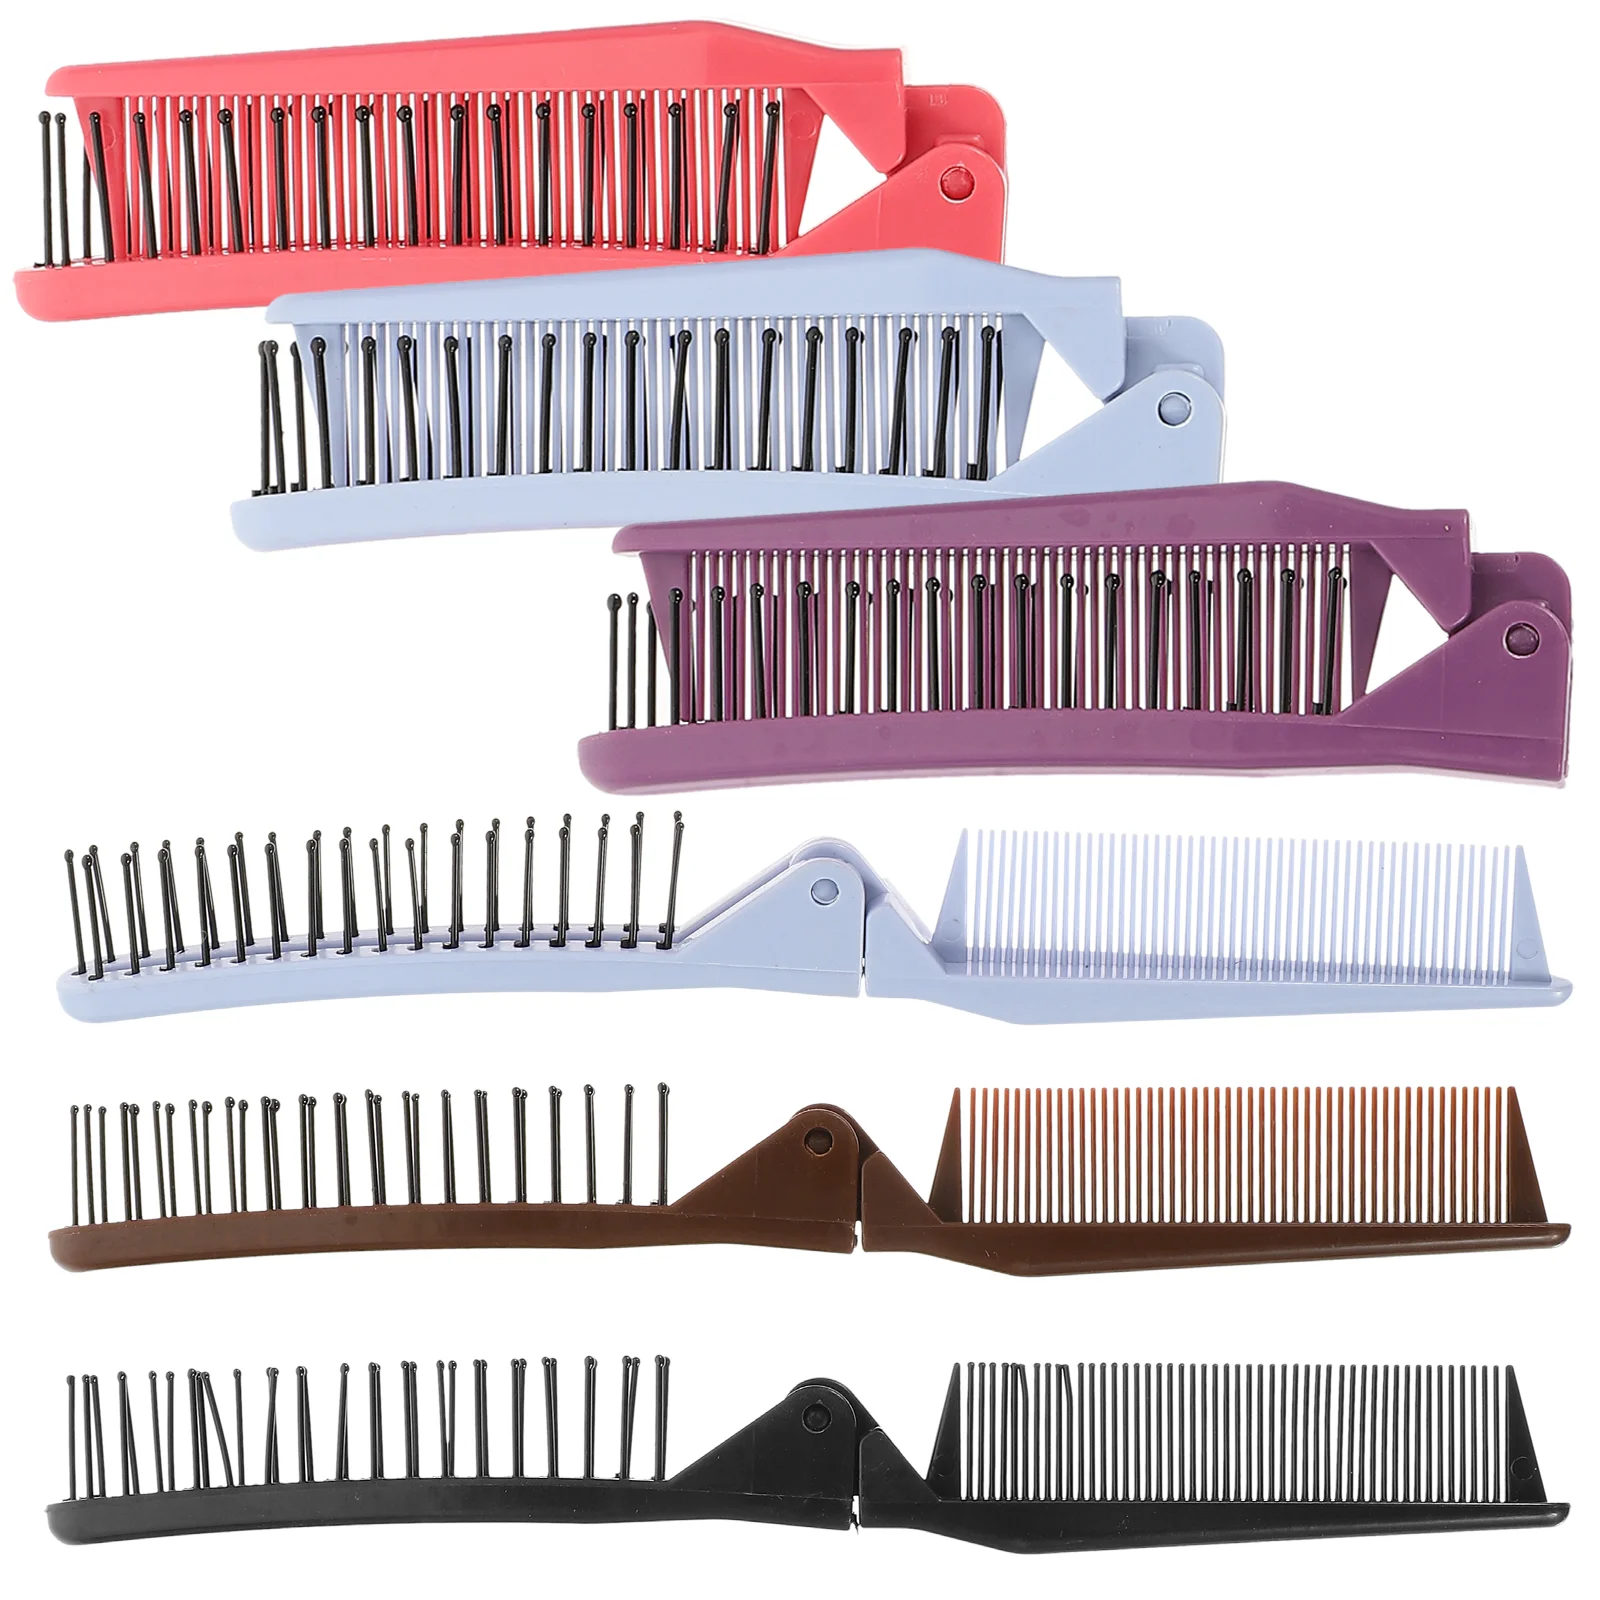 

Comb Hair Combs Salon Styling Tool Women Flat Brush Hairdressing Professional Smooth Handheld Portable Dressing Barber